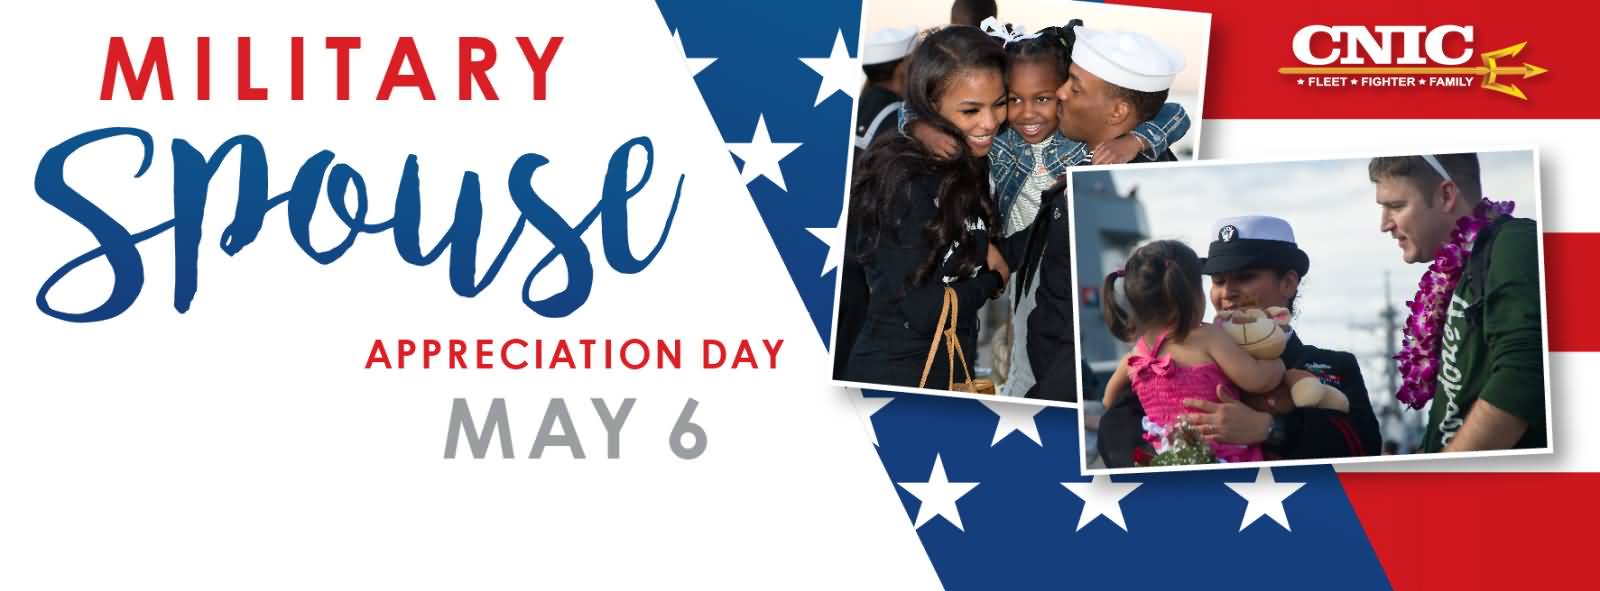 Military Spouse Appreciation Day May 6